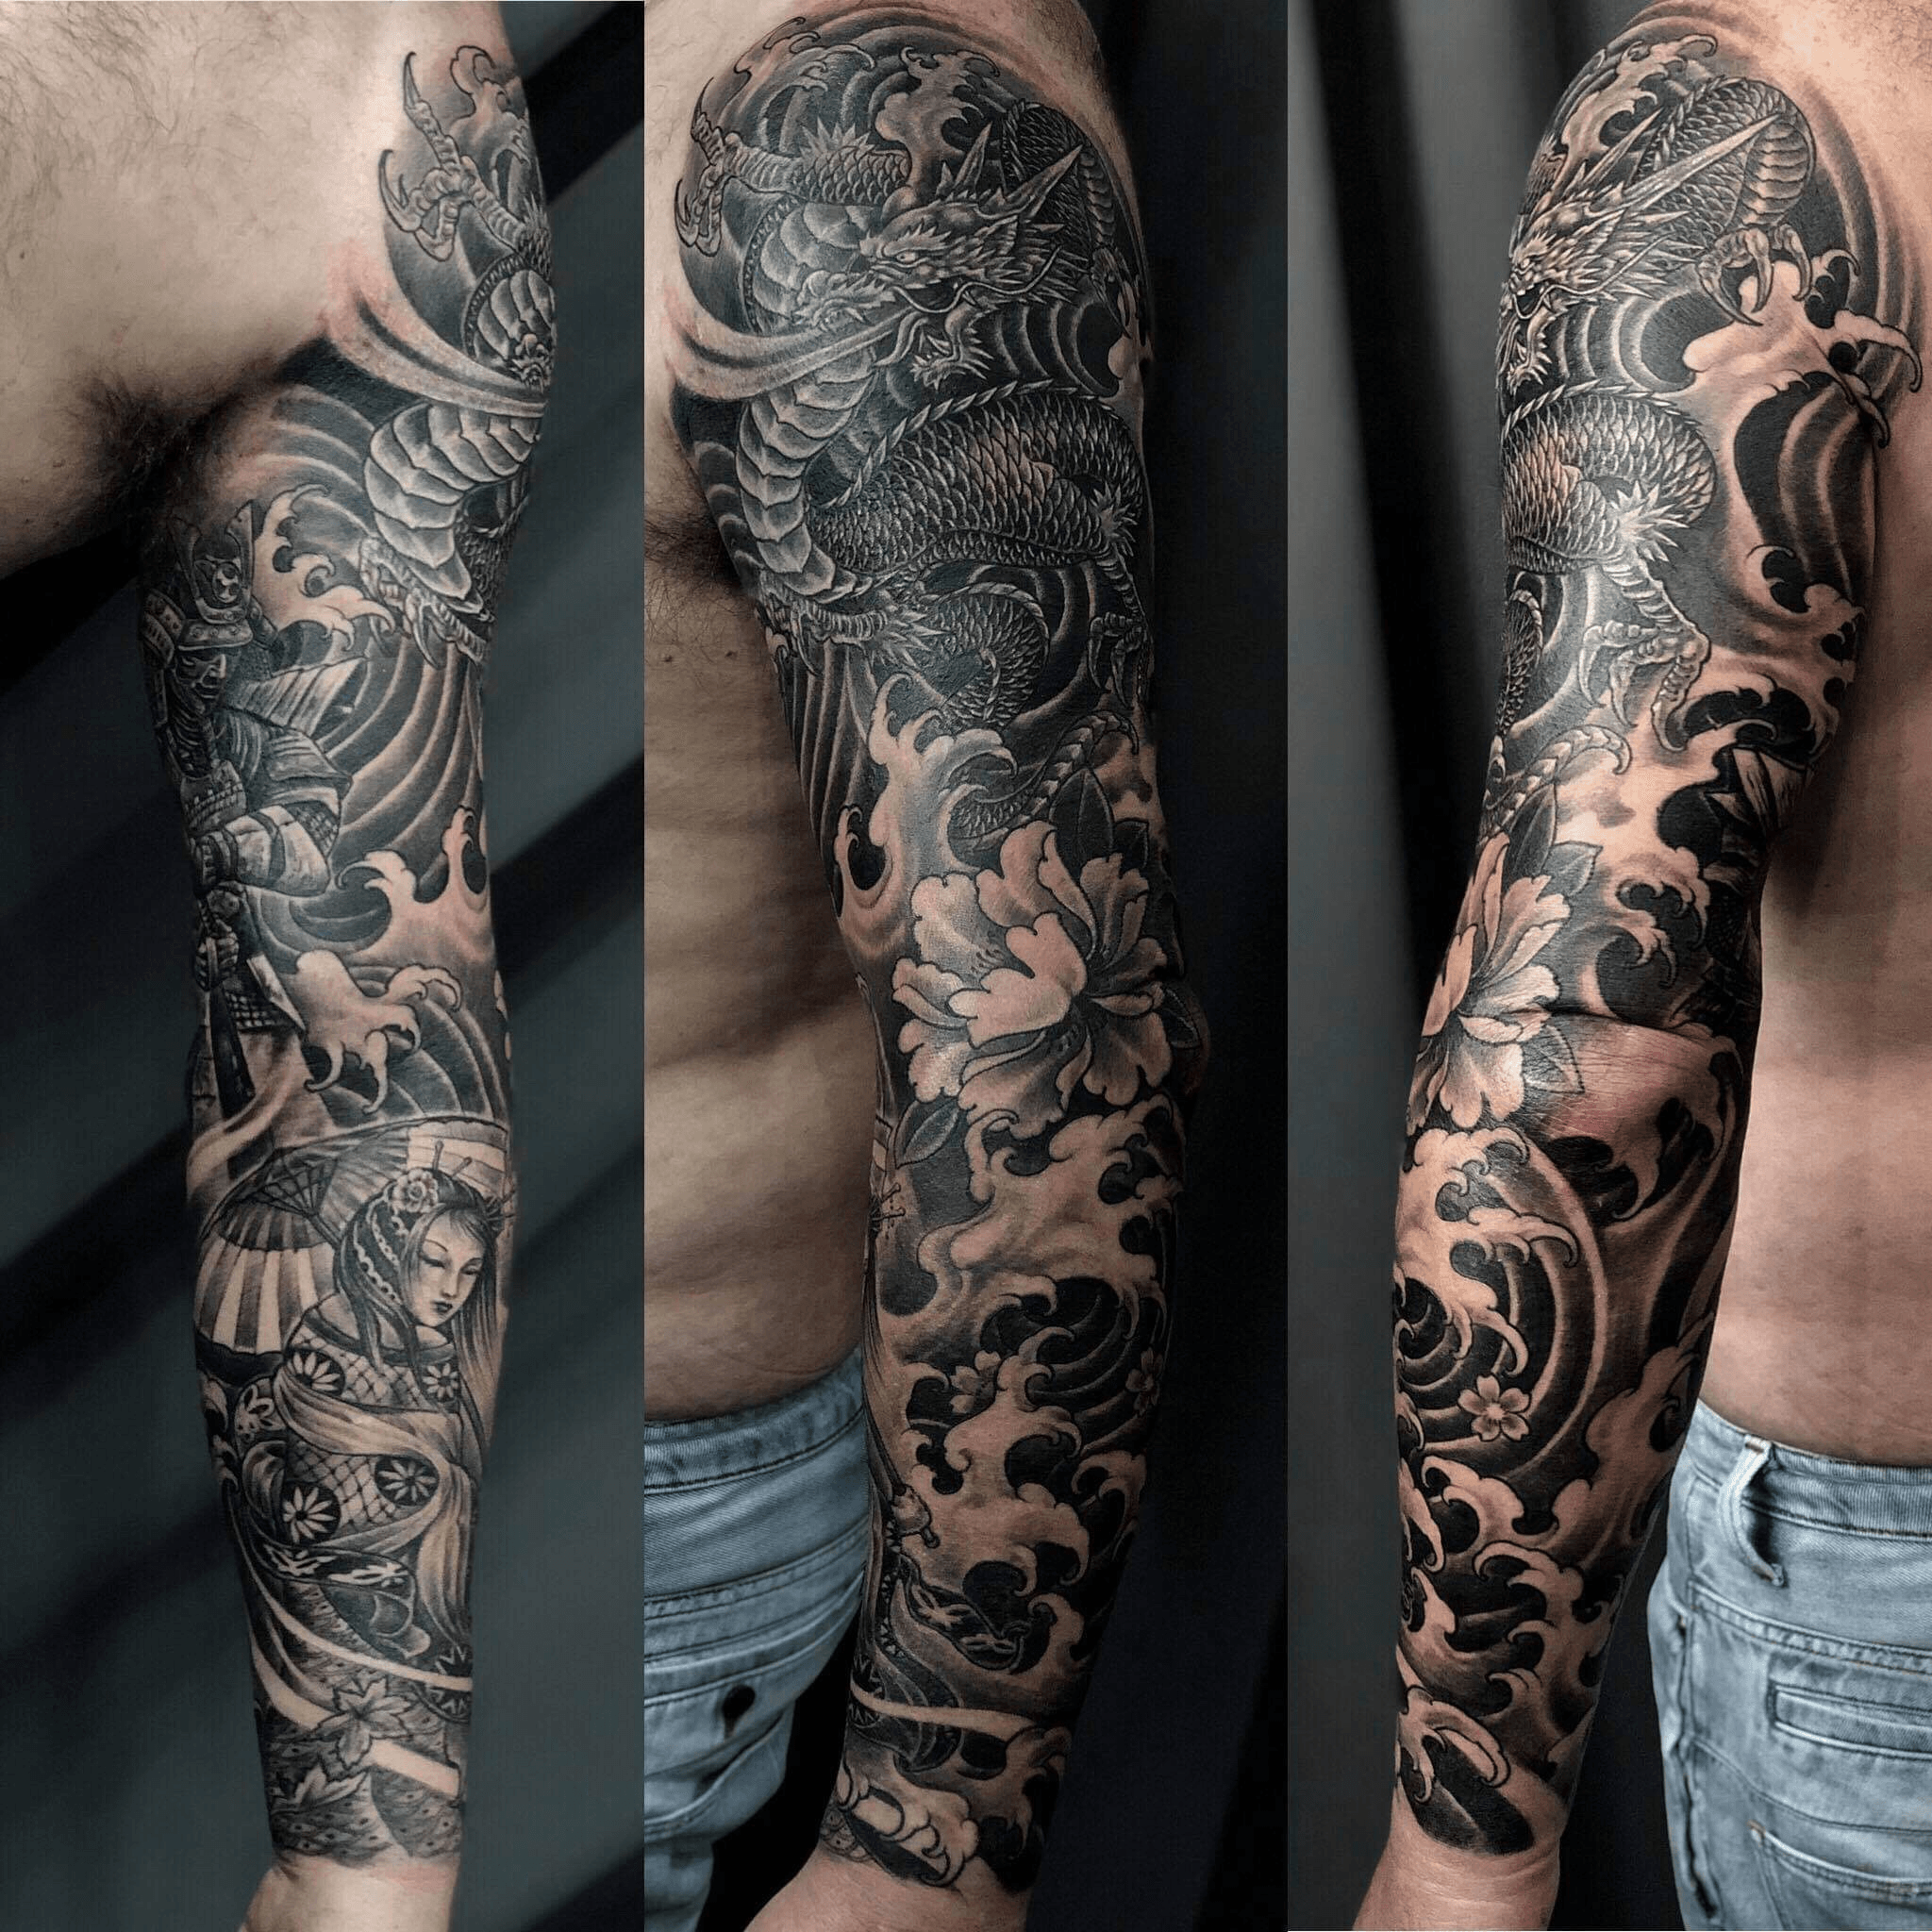 Japanese full sleeve by Stan  Hell Yeah Tattoo Club  Facebook